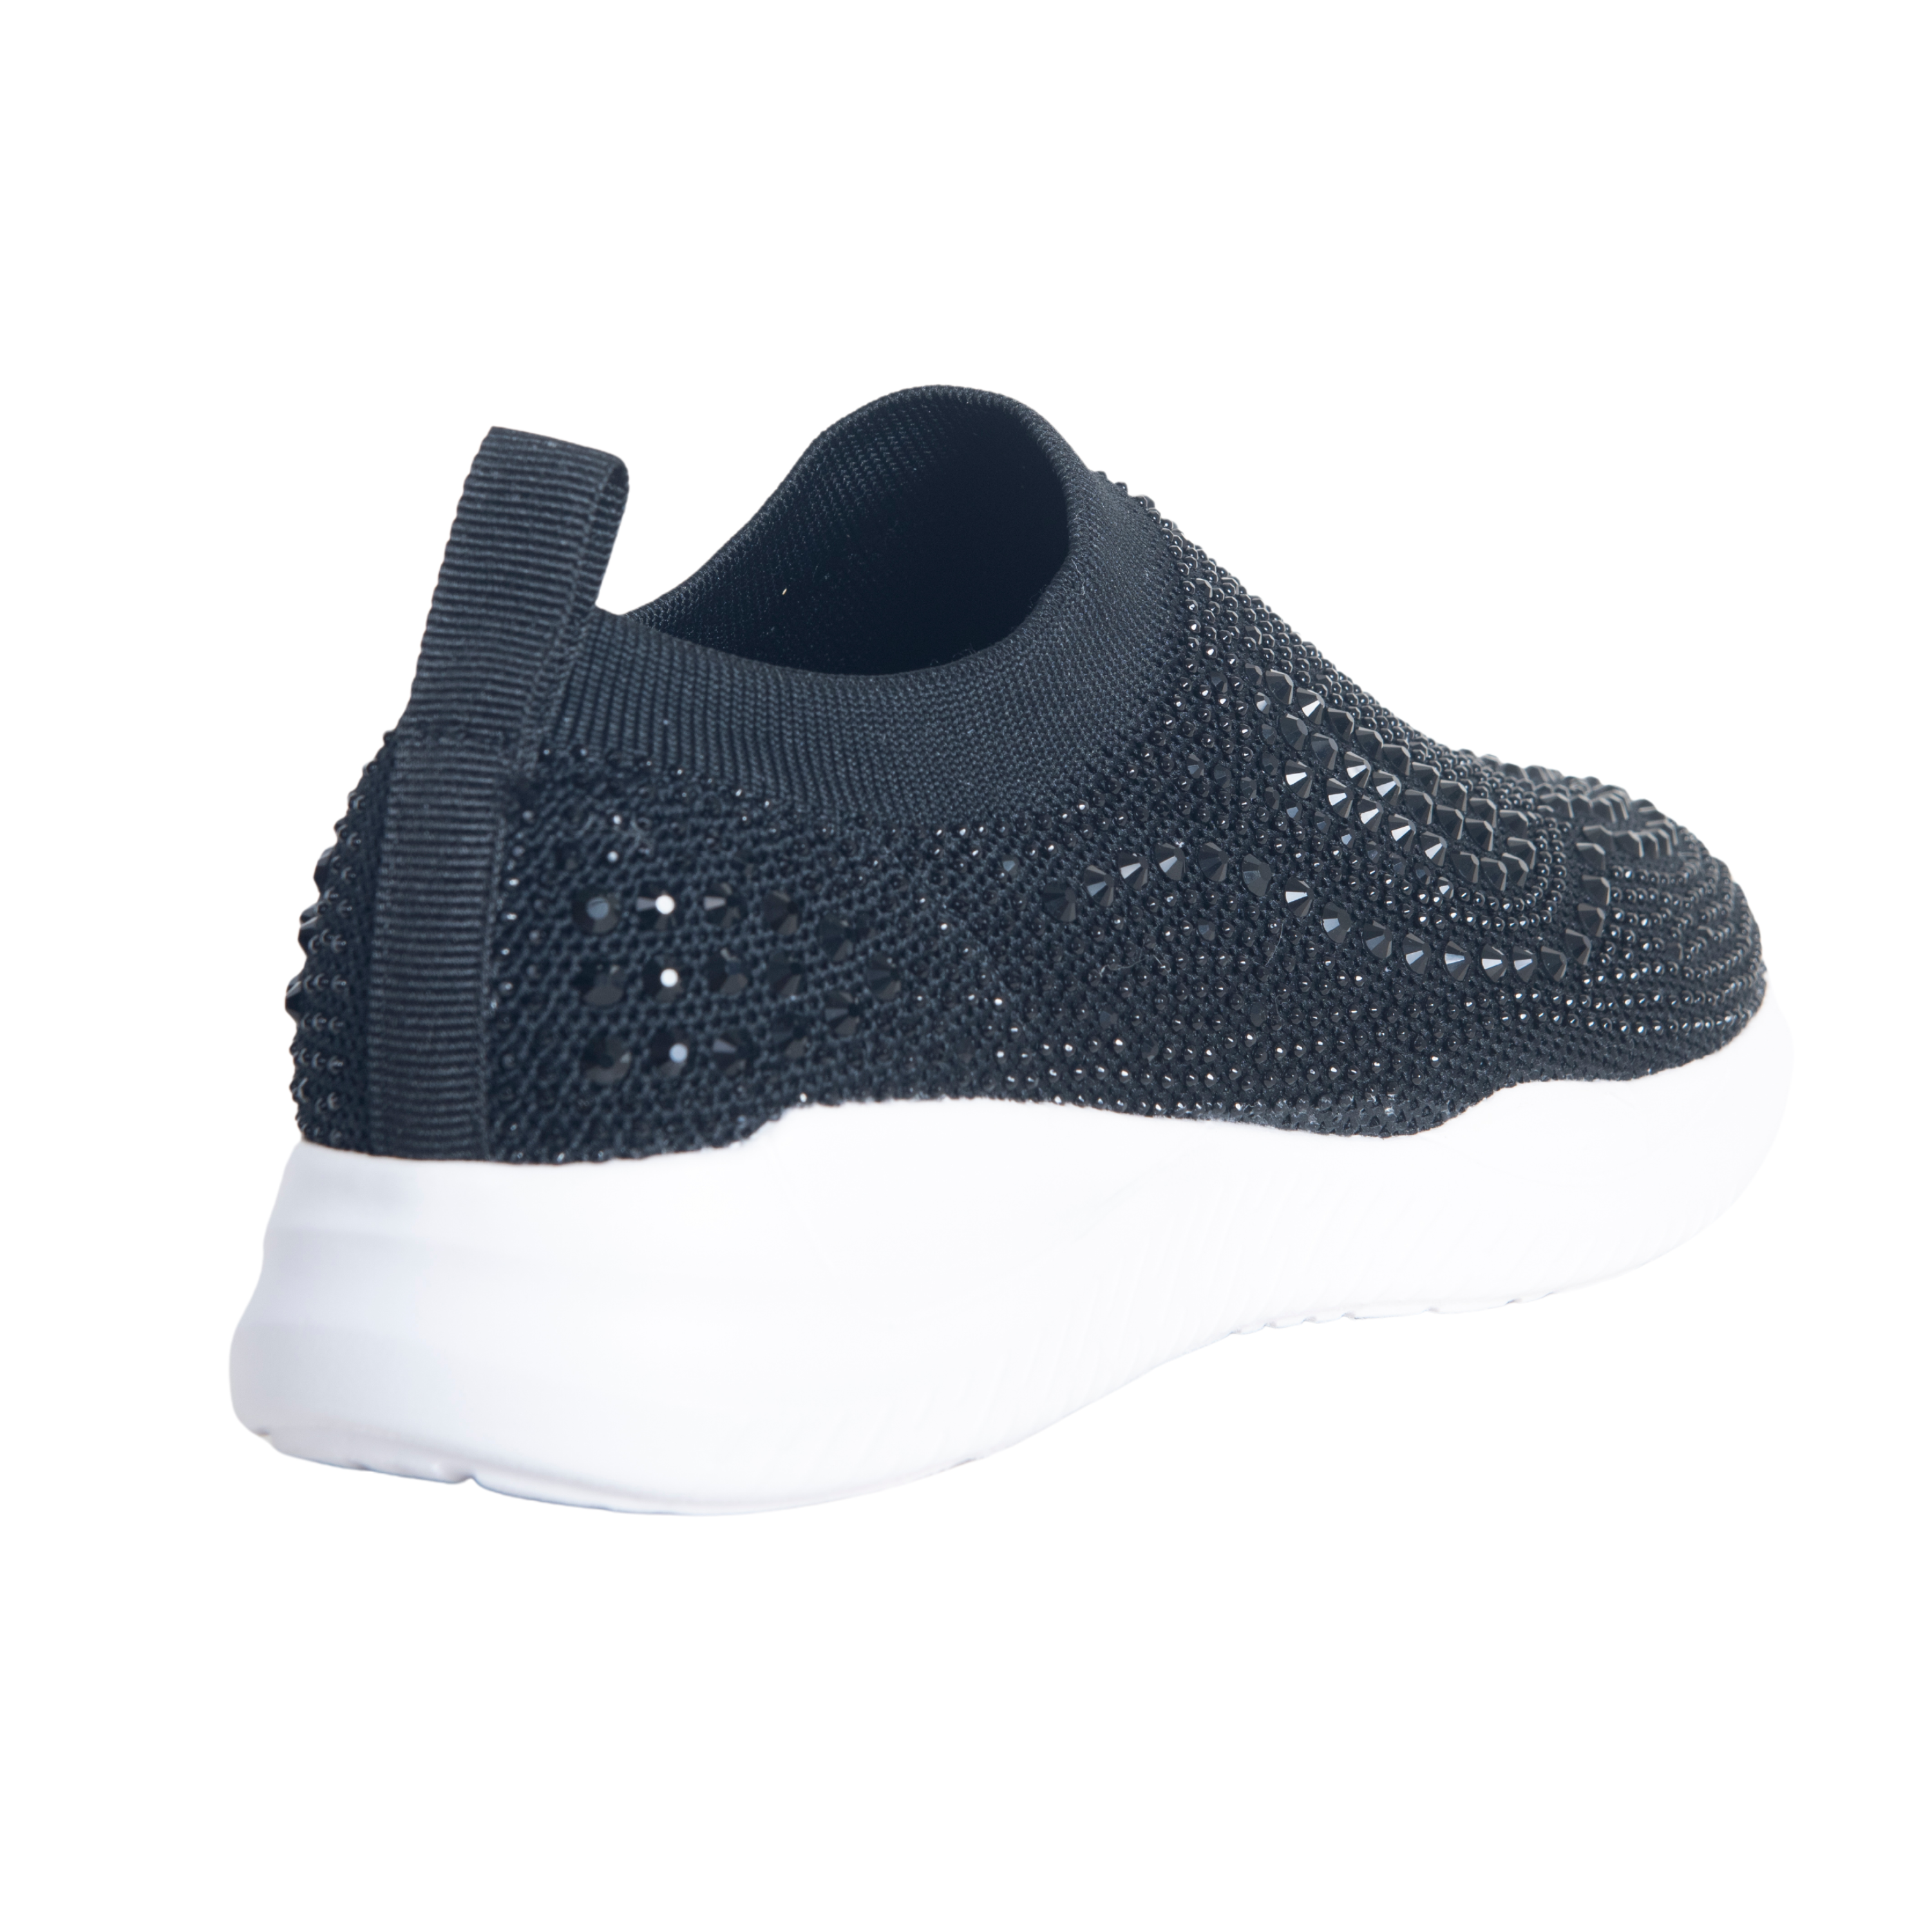 CARMI SNEAKERS WITH SPARKLY RHINESTONE EMBELLISHED